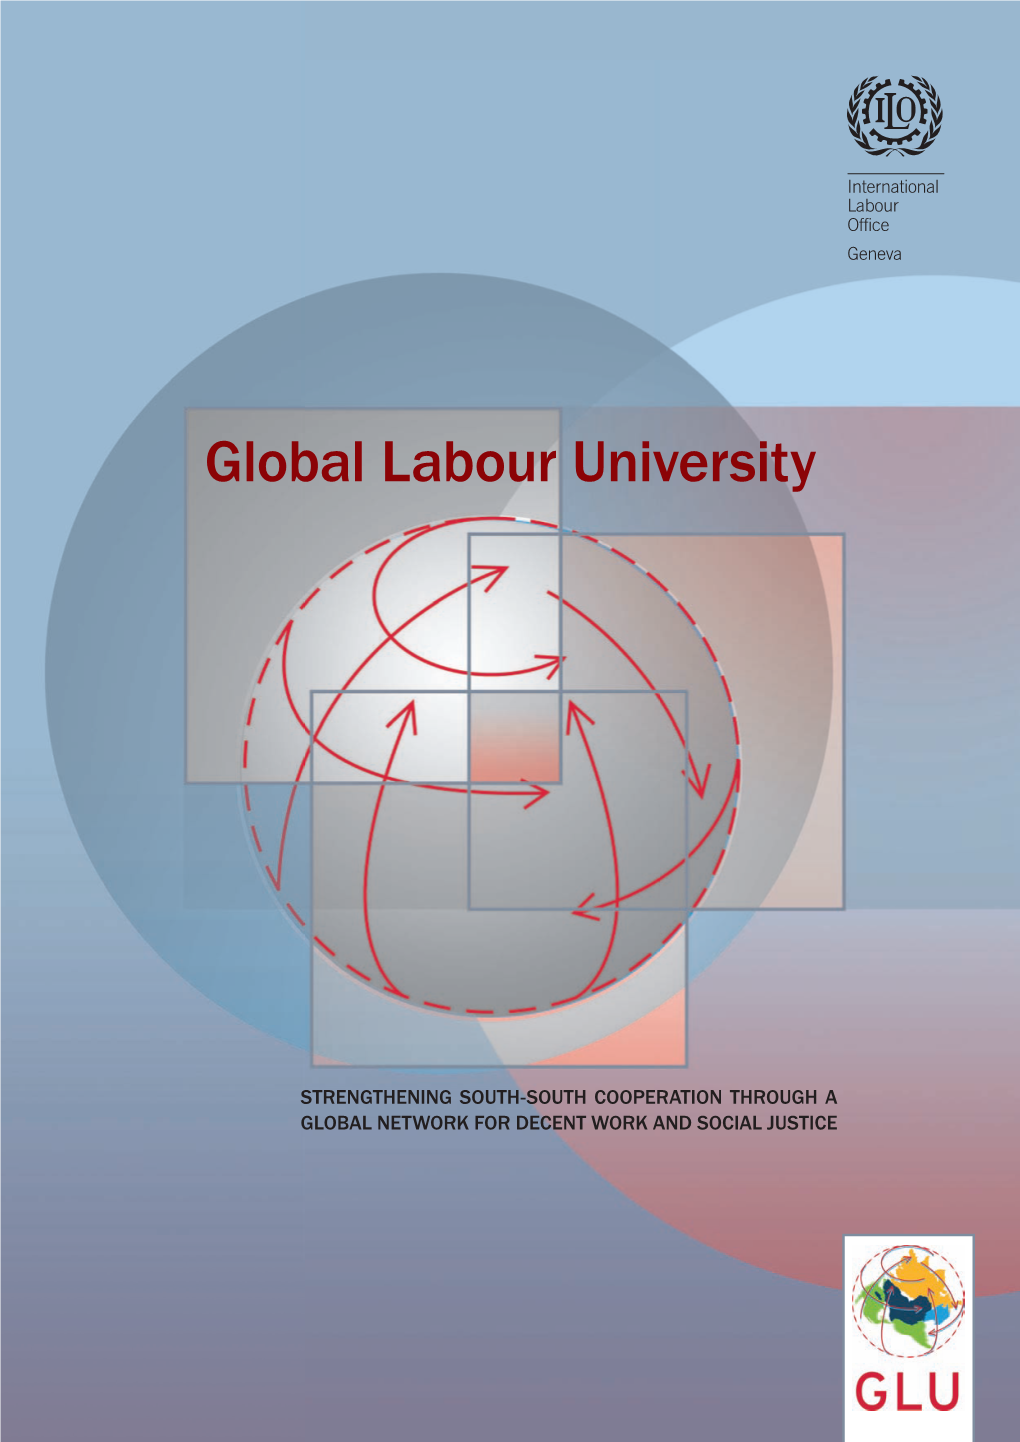 The Global Labour University